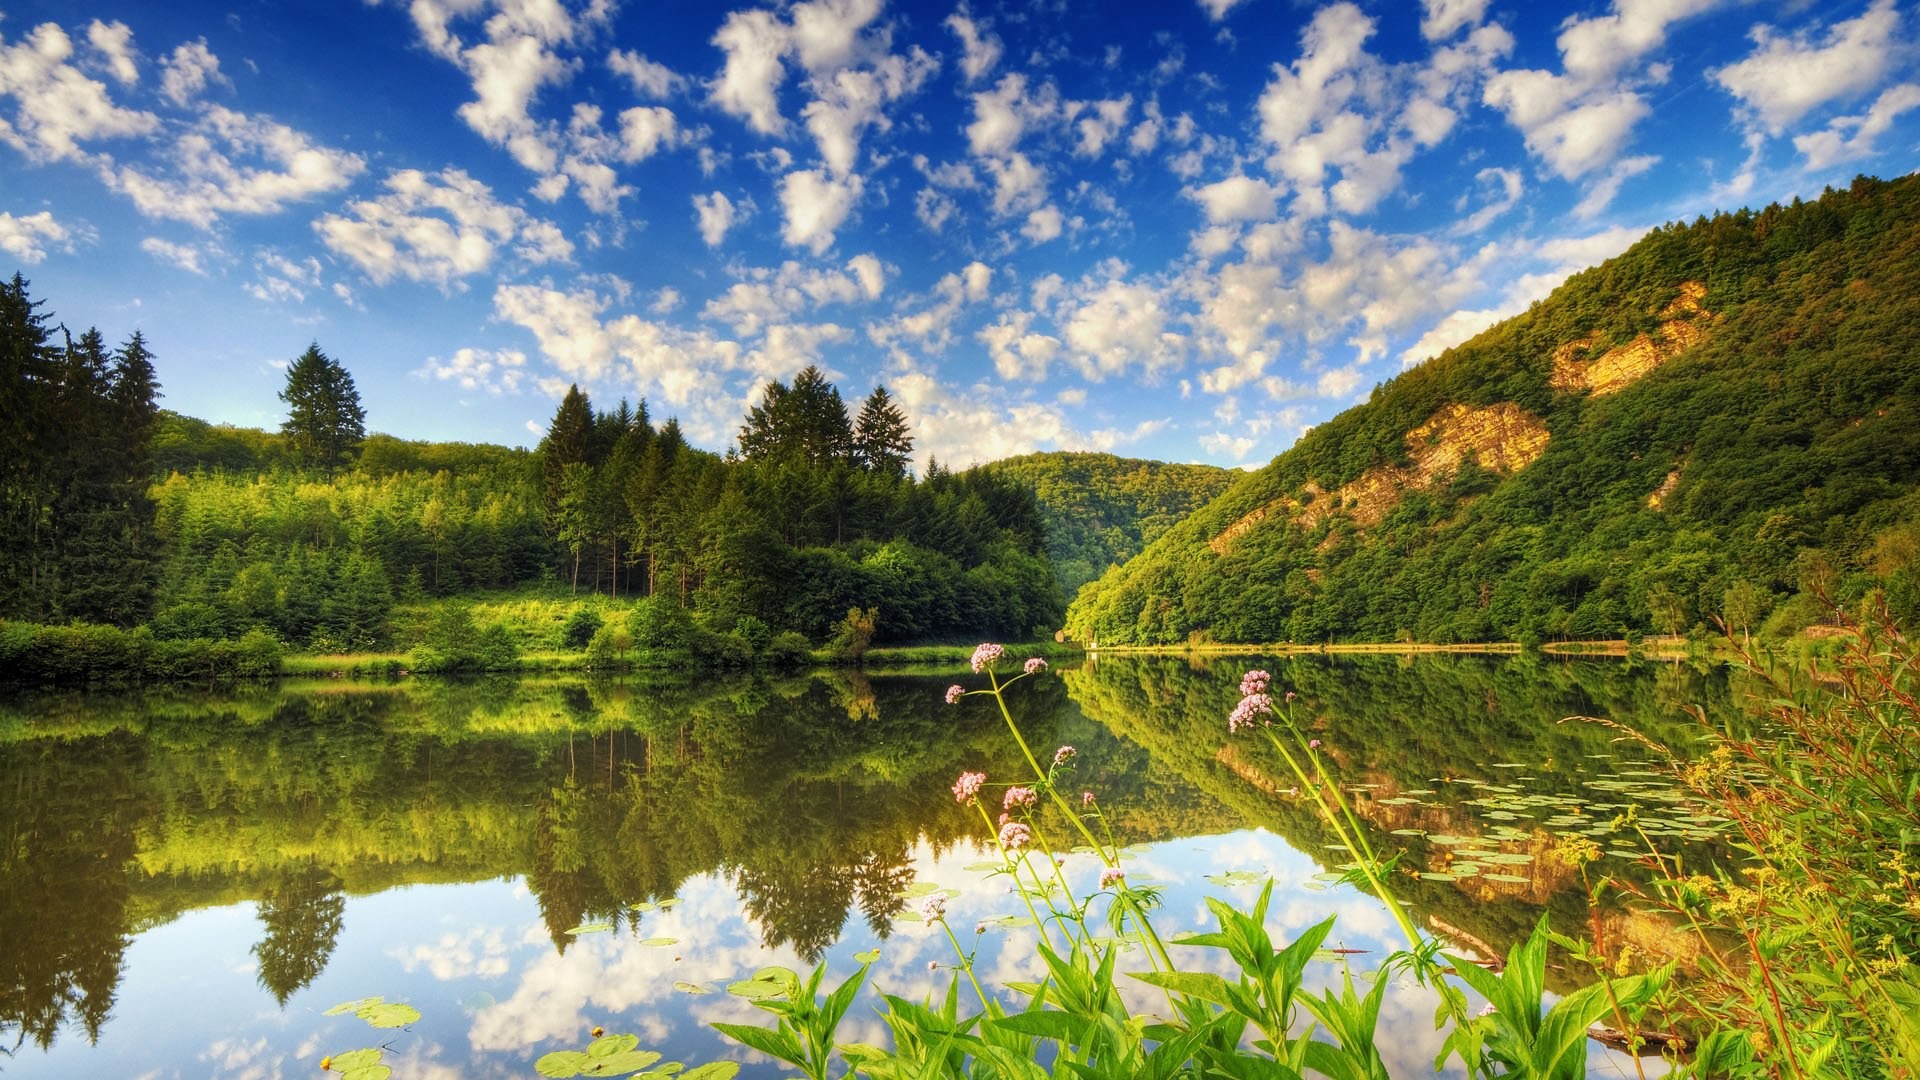 Lake near the forest of conifers wallpaper #39237 - Open Walls